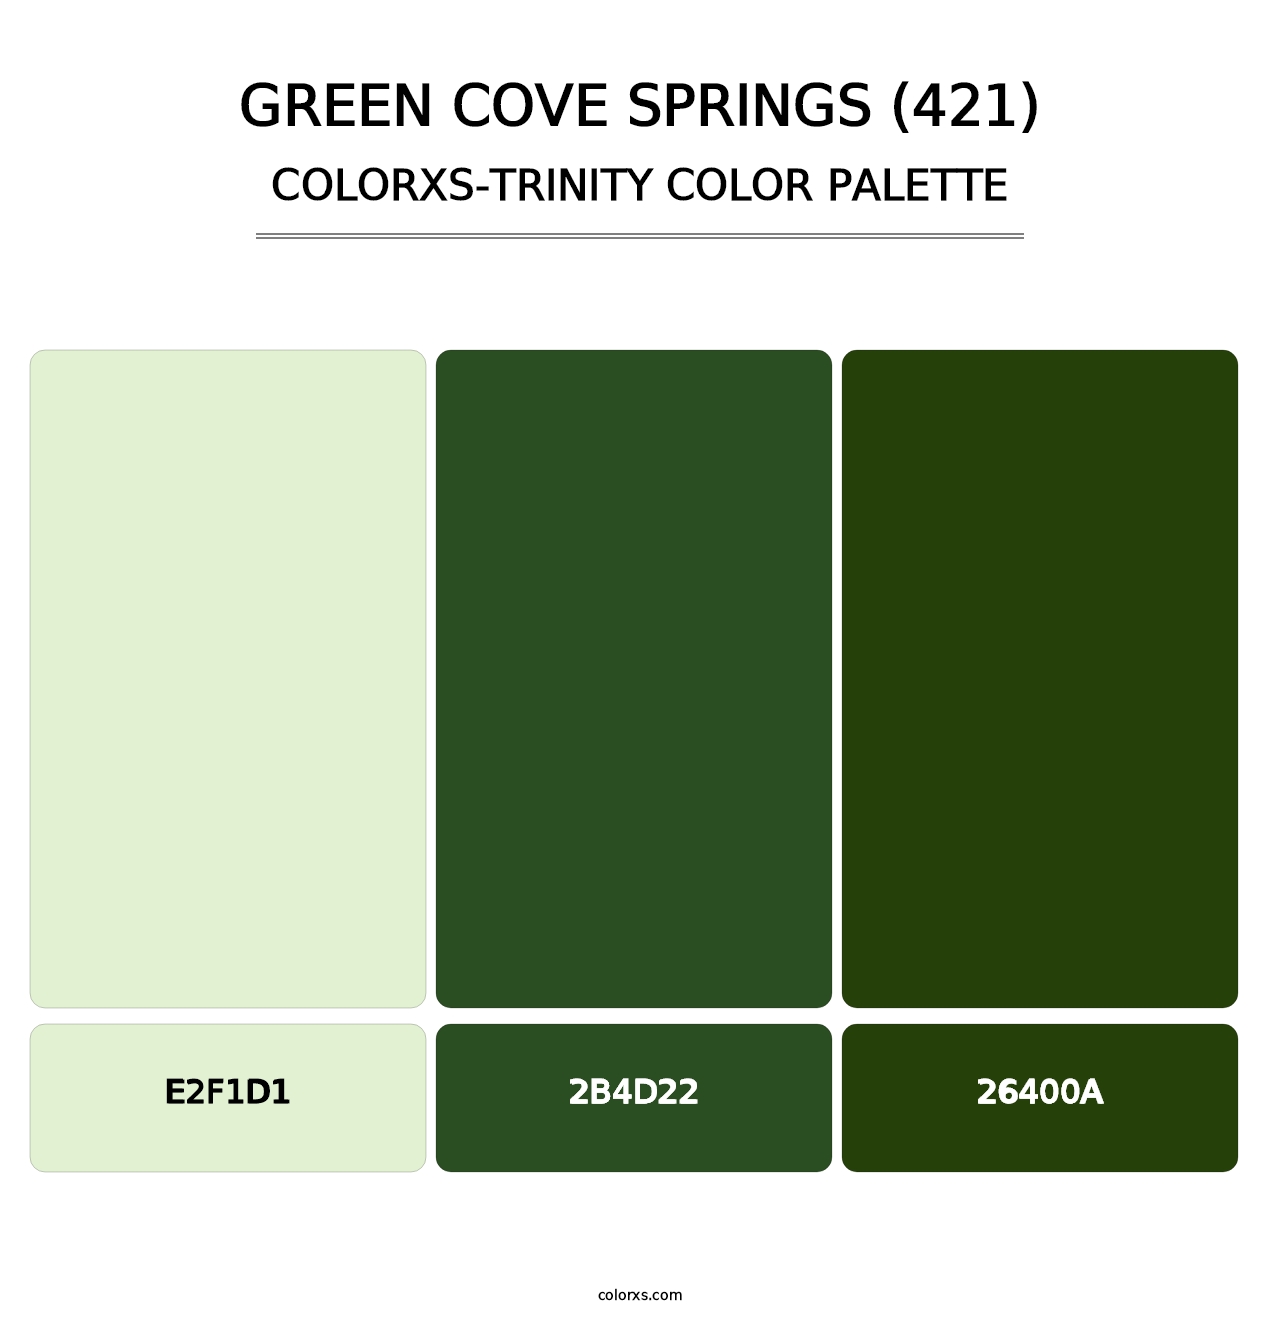 Green Cove Springs (421) - Colorxs Trinity Palette